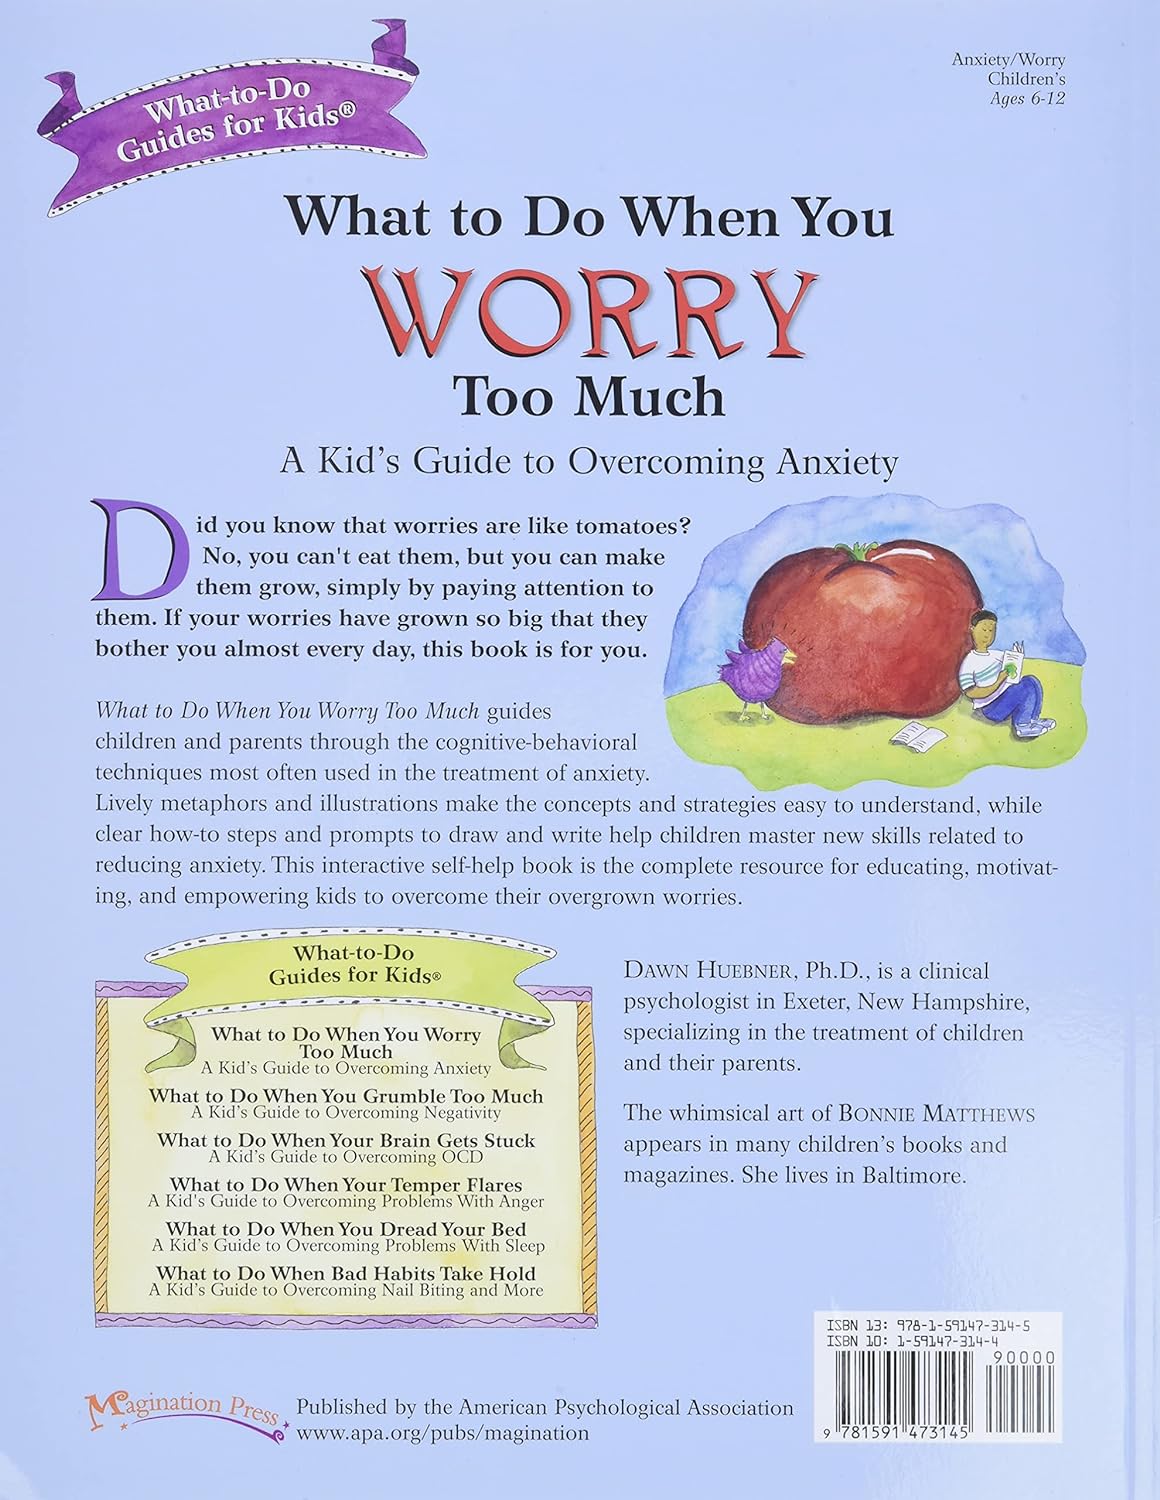 What to Do When You Worry Too Much: A Kids Guide to Overcoming Anxiety (What-to-Do Guides for Kids Series)     Paperback – September 15, 2005